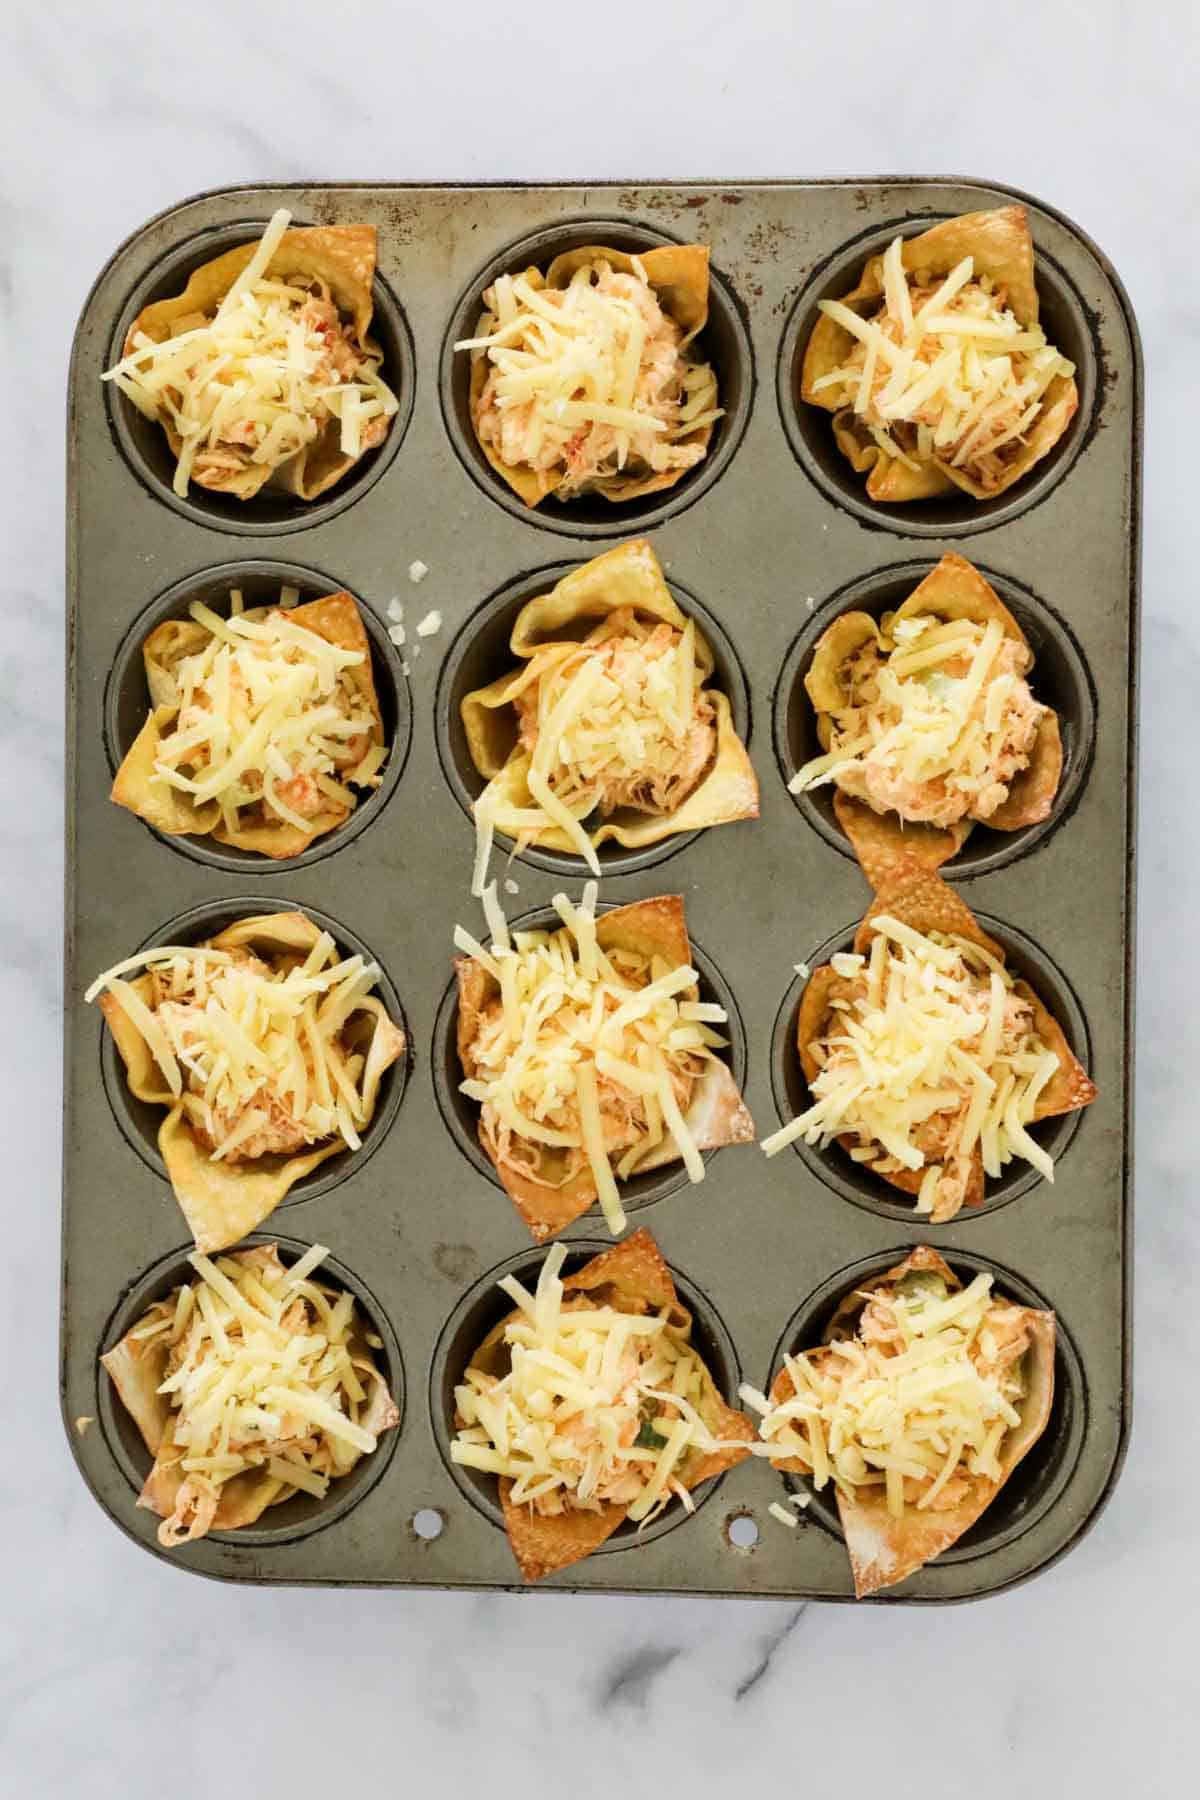 Crispy bases filled with mixture and sprinkled with cheese, ready to be baked.